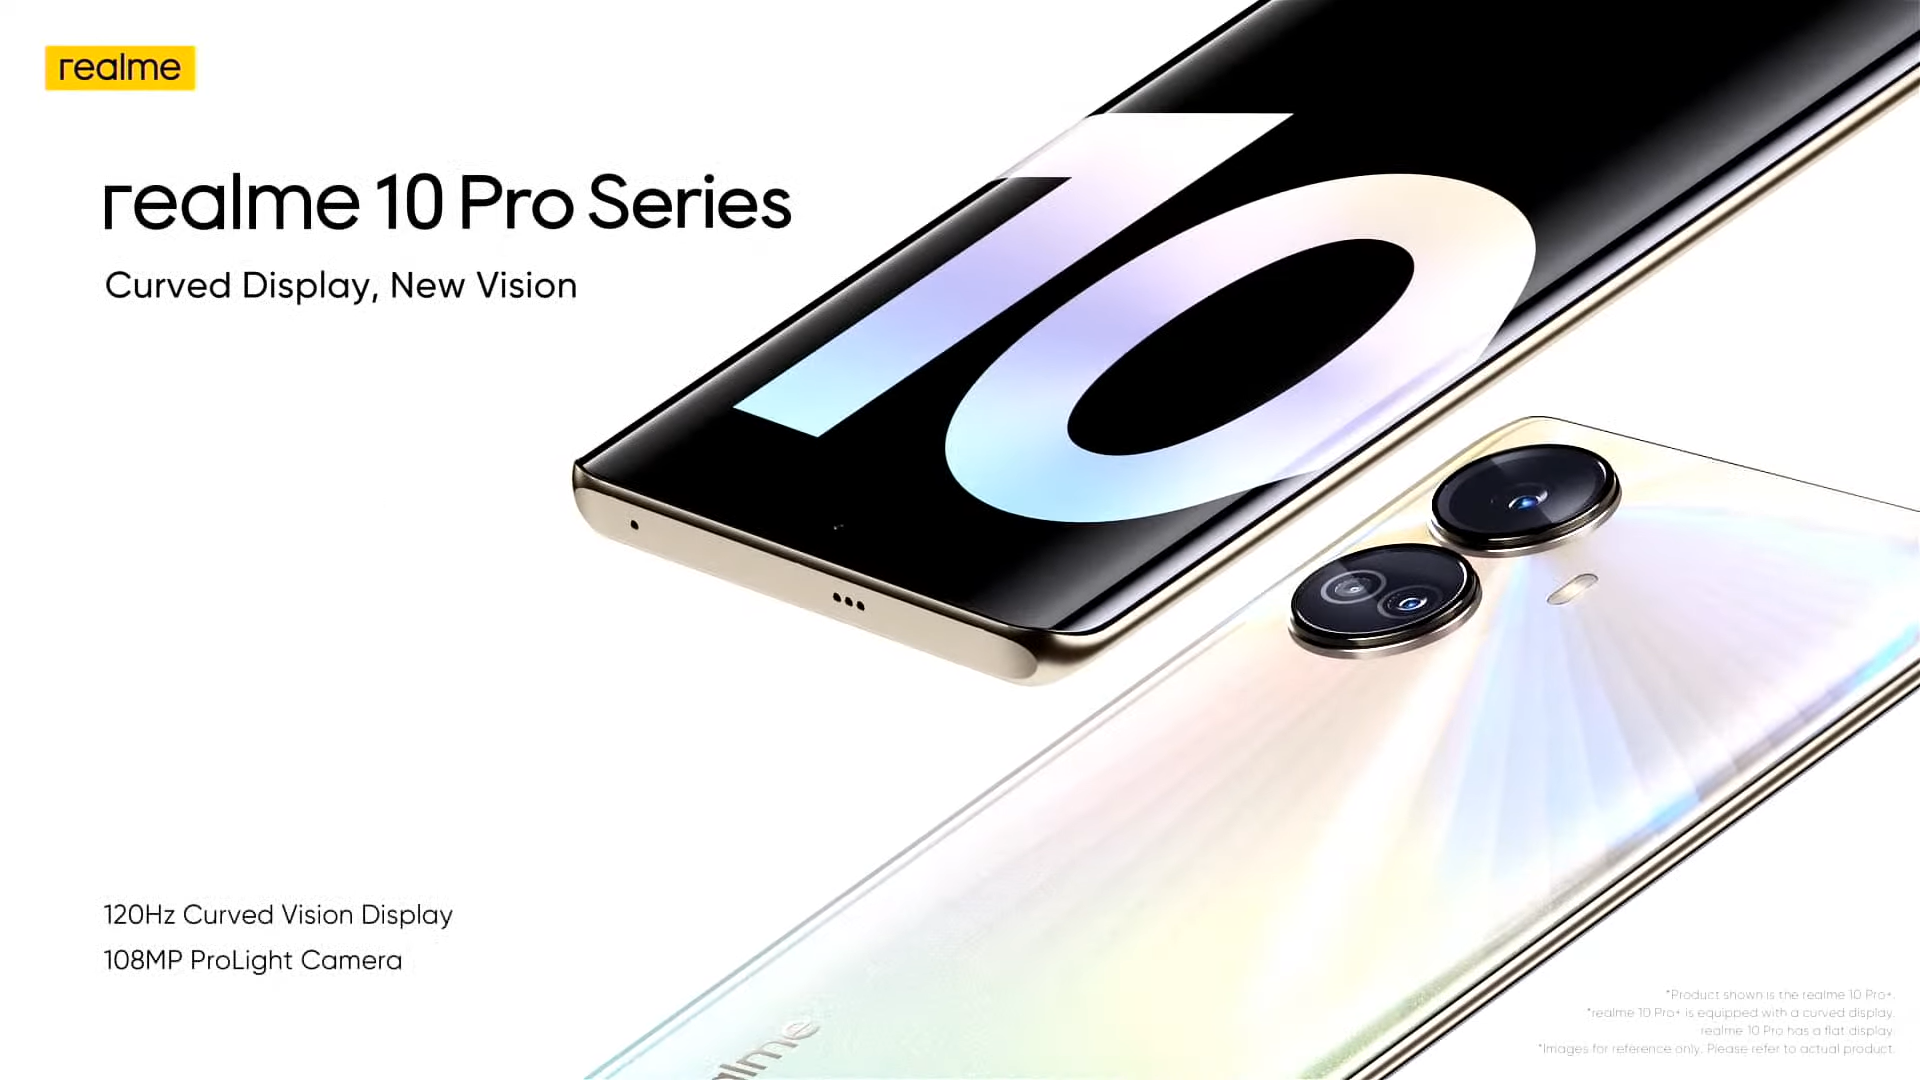 Realme 10 Pro and Pro Plus Global and Indian version prices